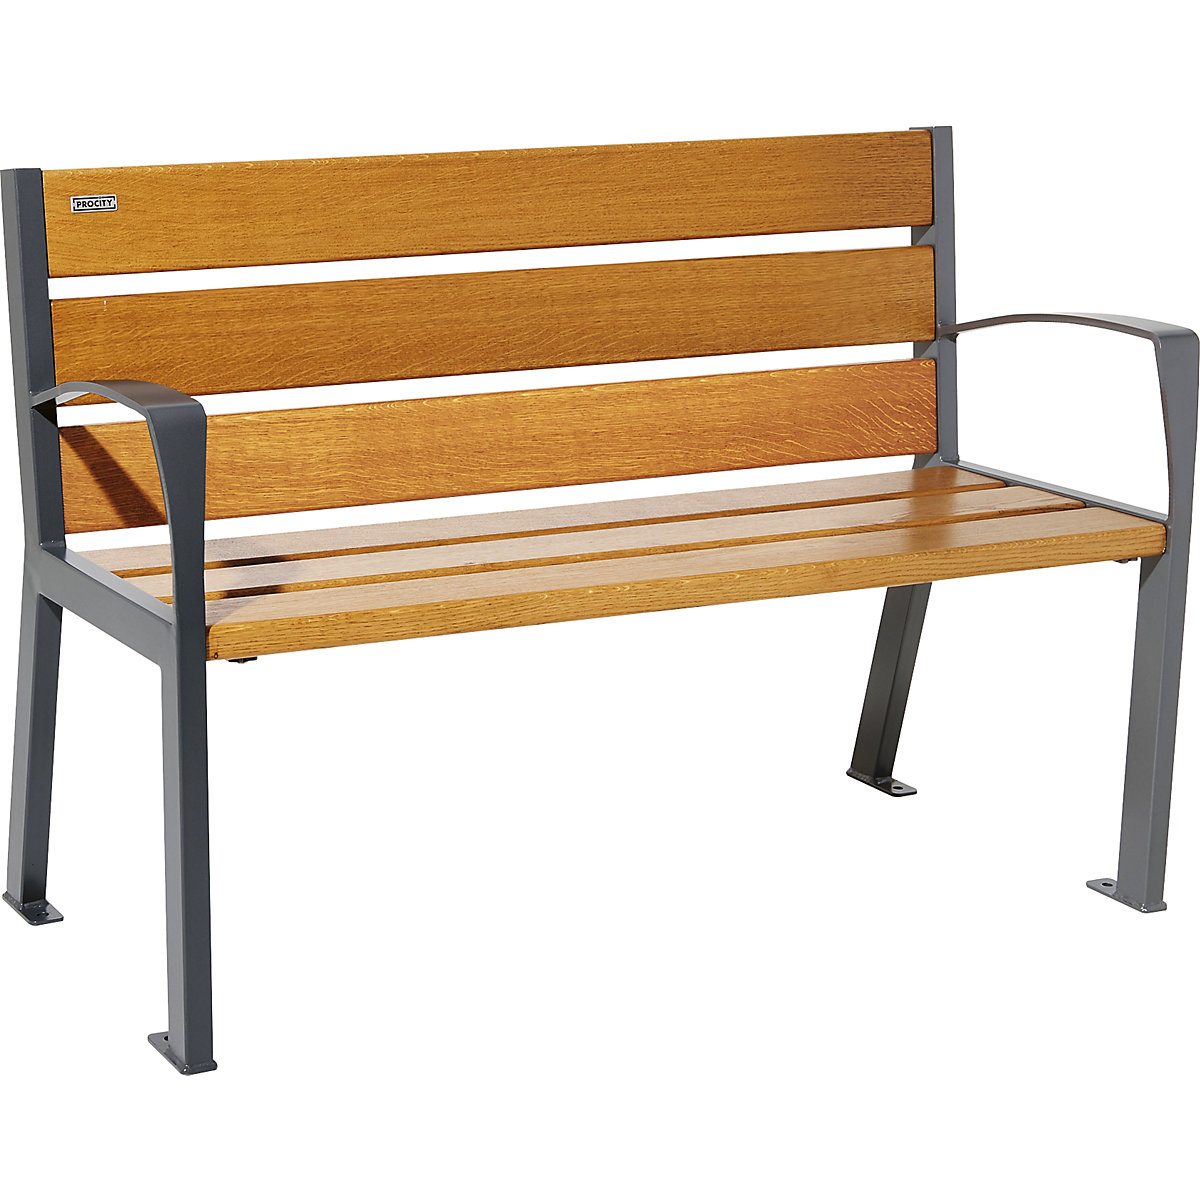 SILAOS® wooden bench with back rest – PROCITY